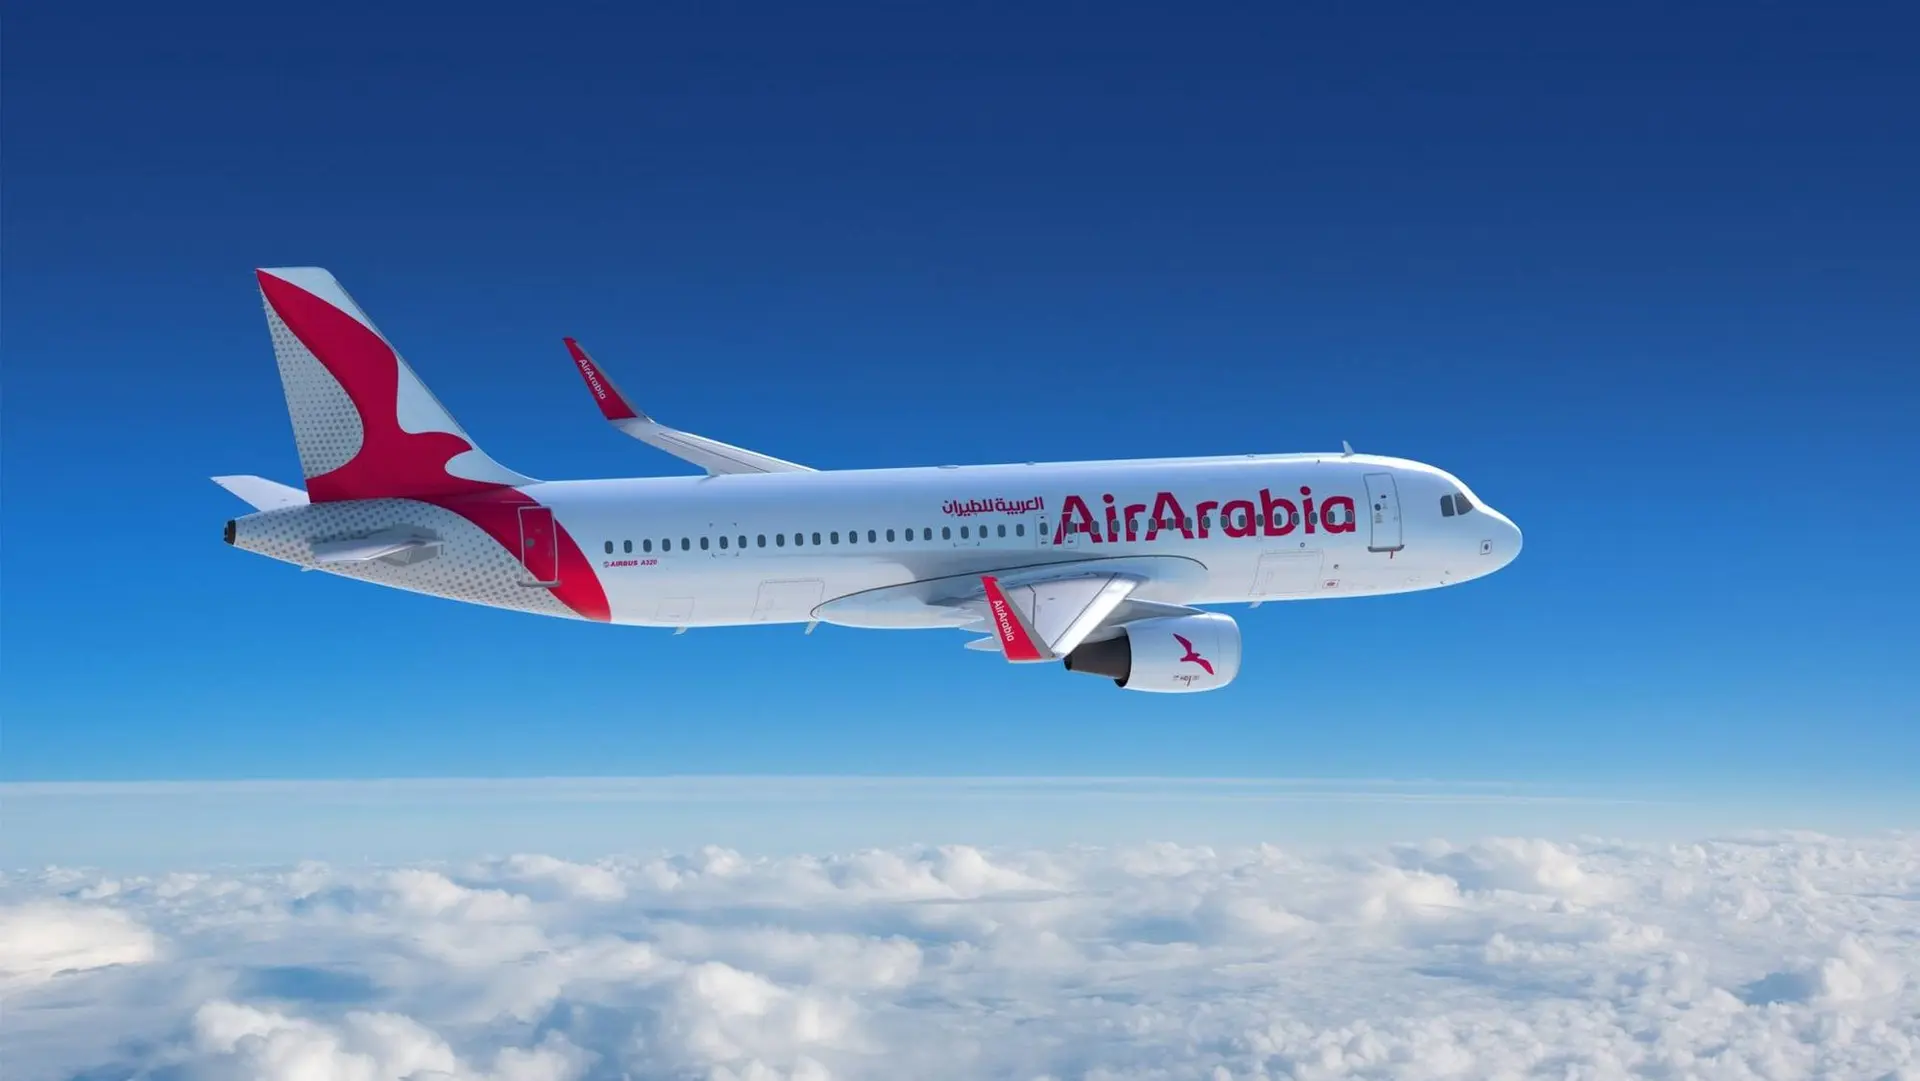 Air Arabia plane in the sky between the clouds